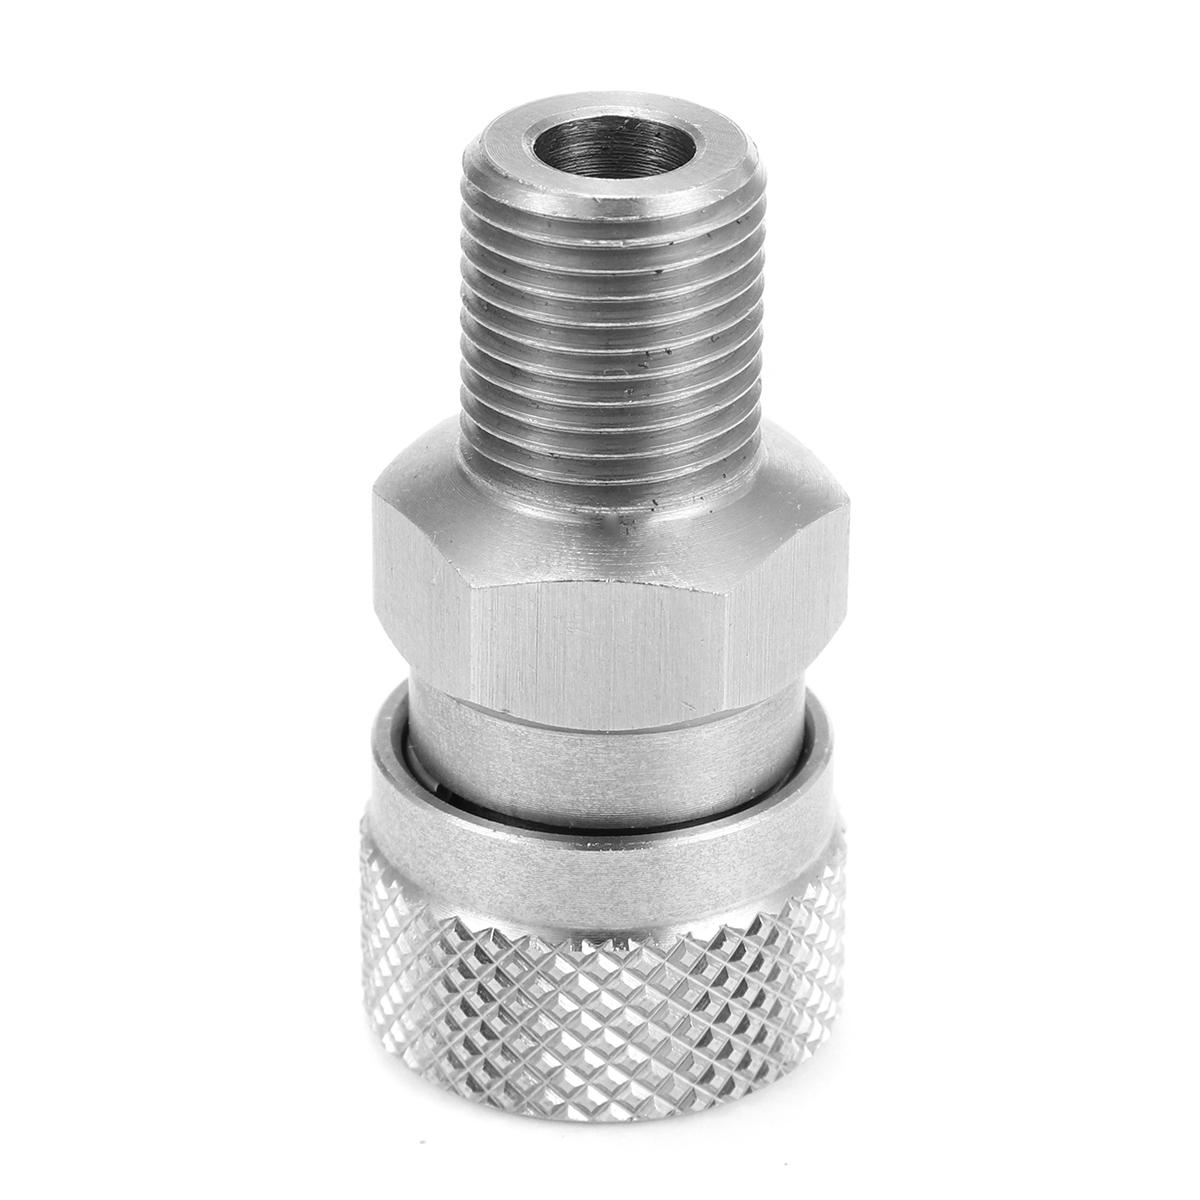 

1/8 inch BSP Stainless Steel Male Plug Quick Head Connector PCP Release Disconnect Coupler Socket